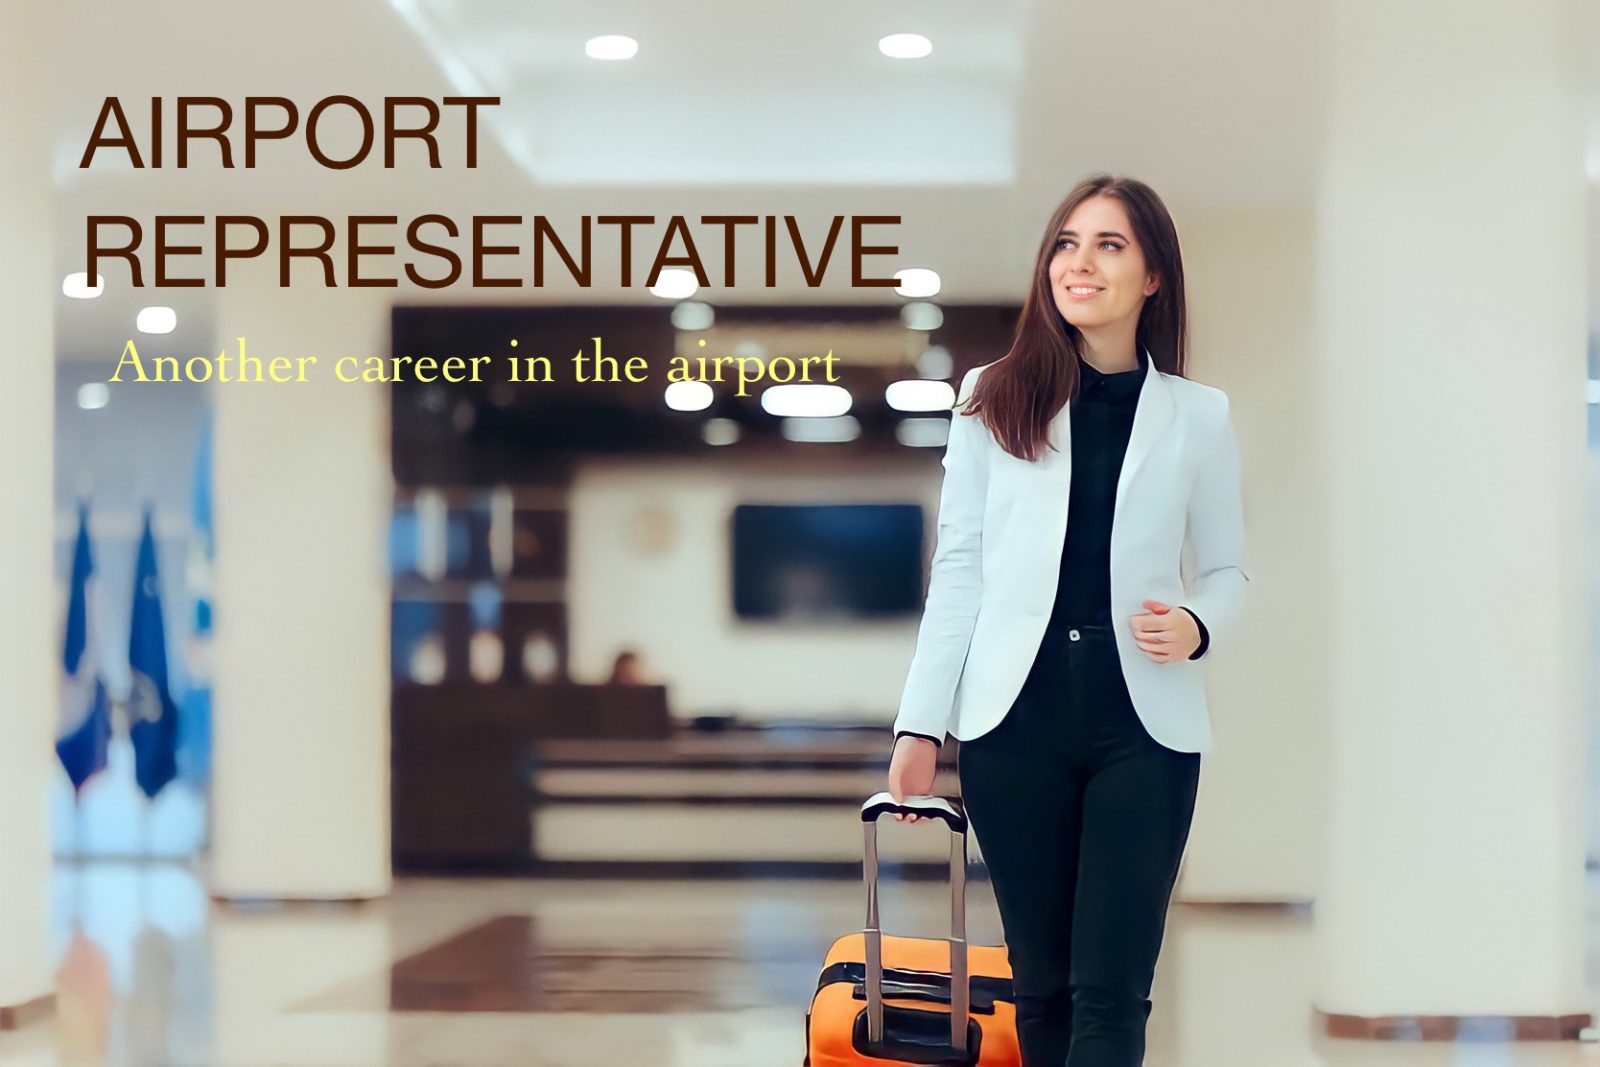 “AIRPORT REPRESENTATIVE” Another career in the airport